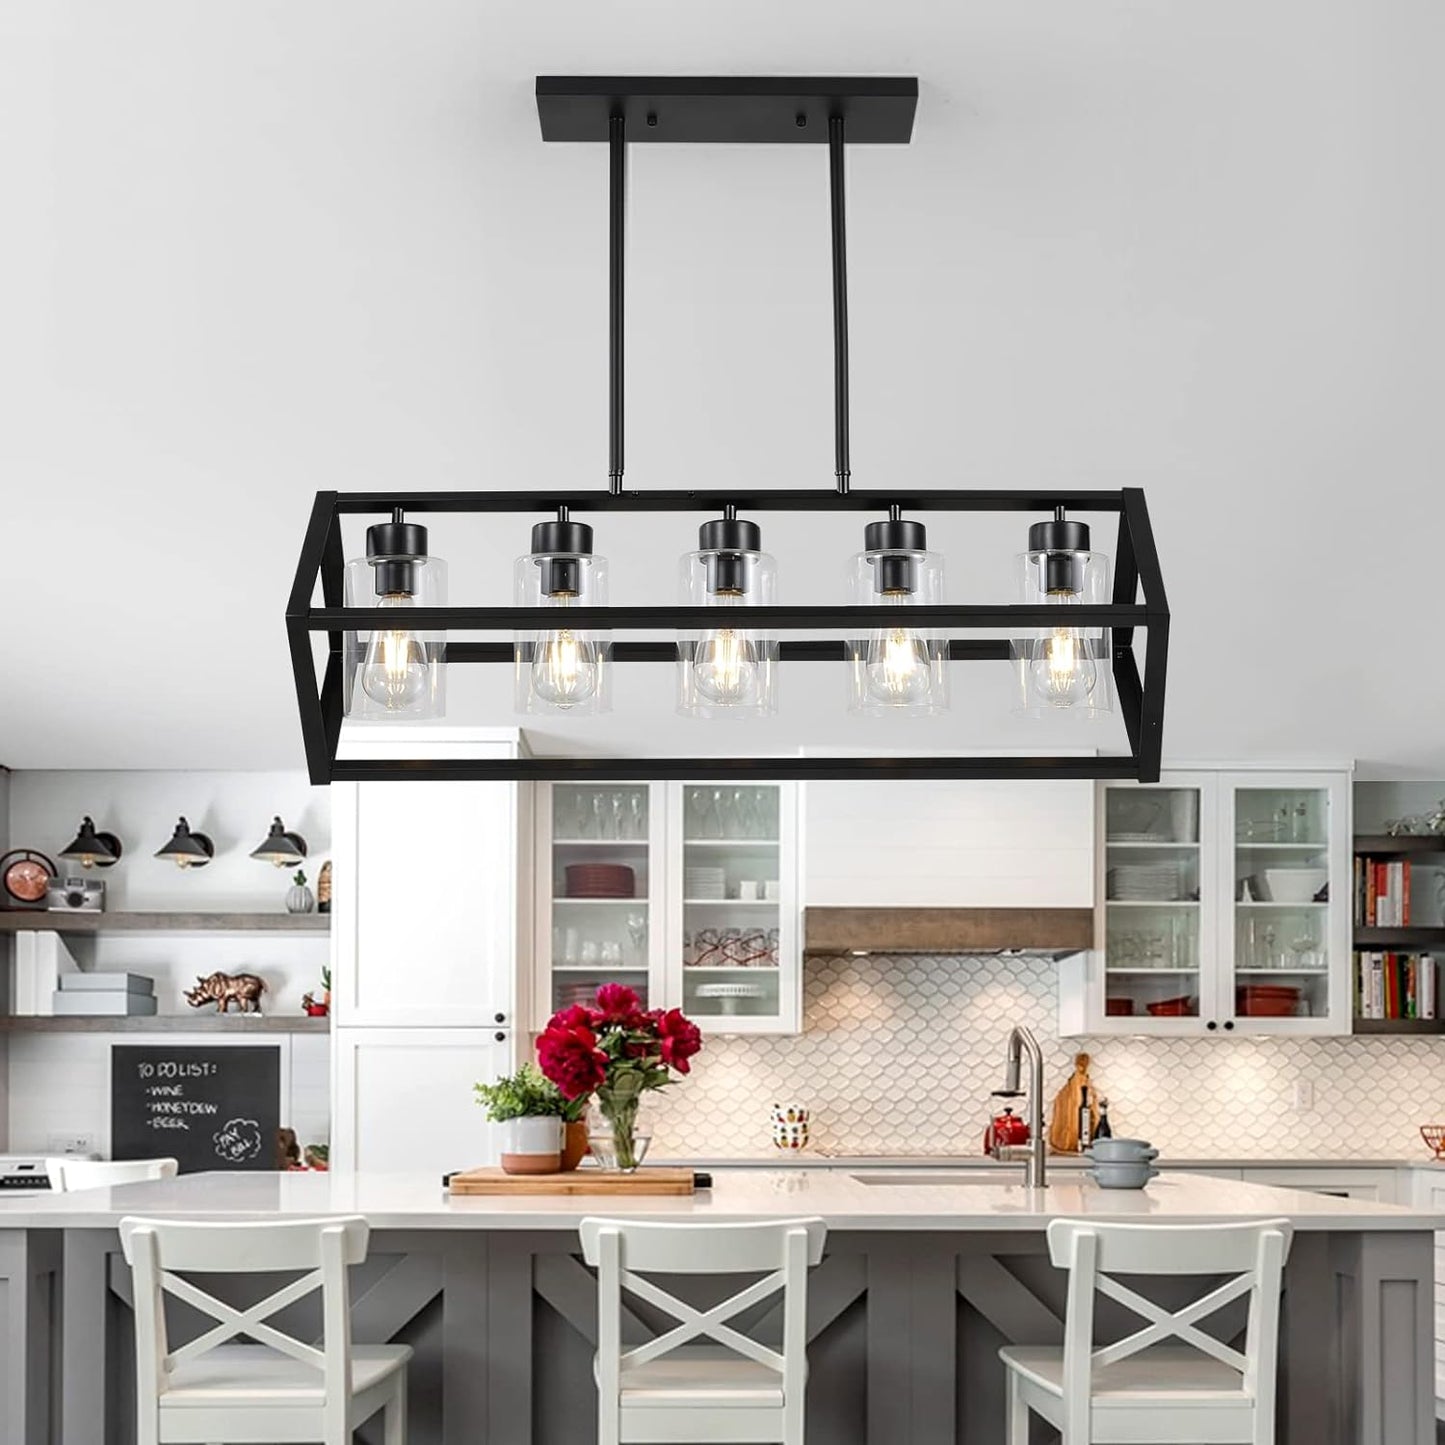 KERHENE 5-Light Rectangle Chandeliers, Farmhouse Chandeliers with 6 Glass Shades, 5-Light Linear Kitchen Island Light for Dining Room